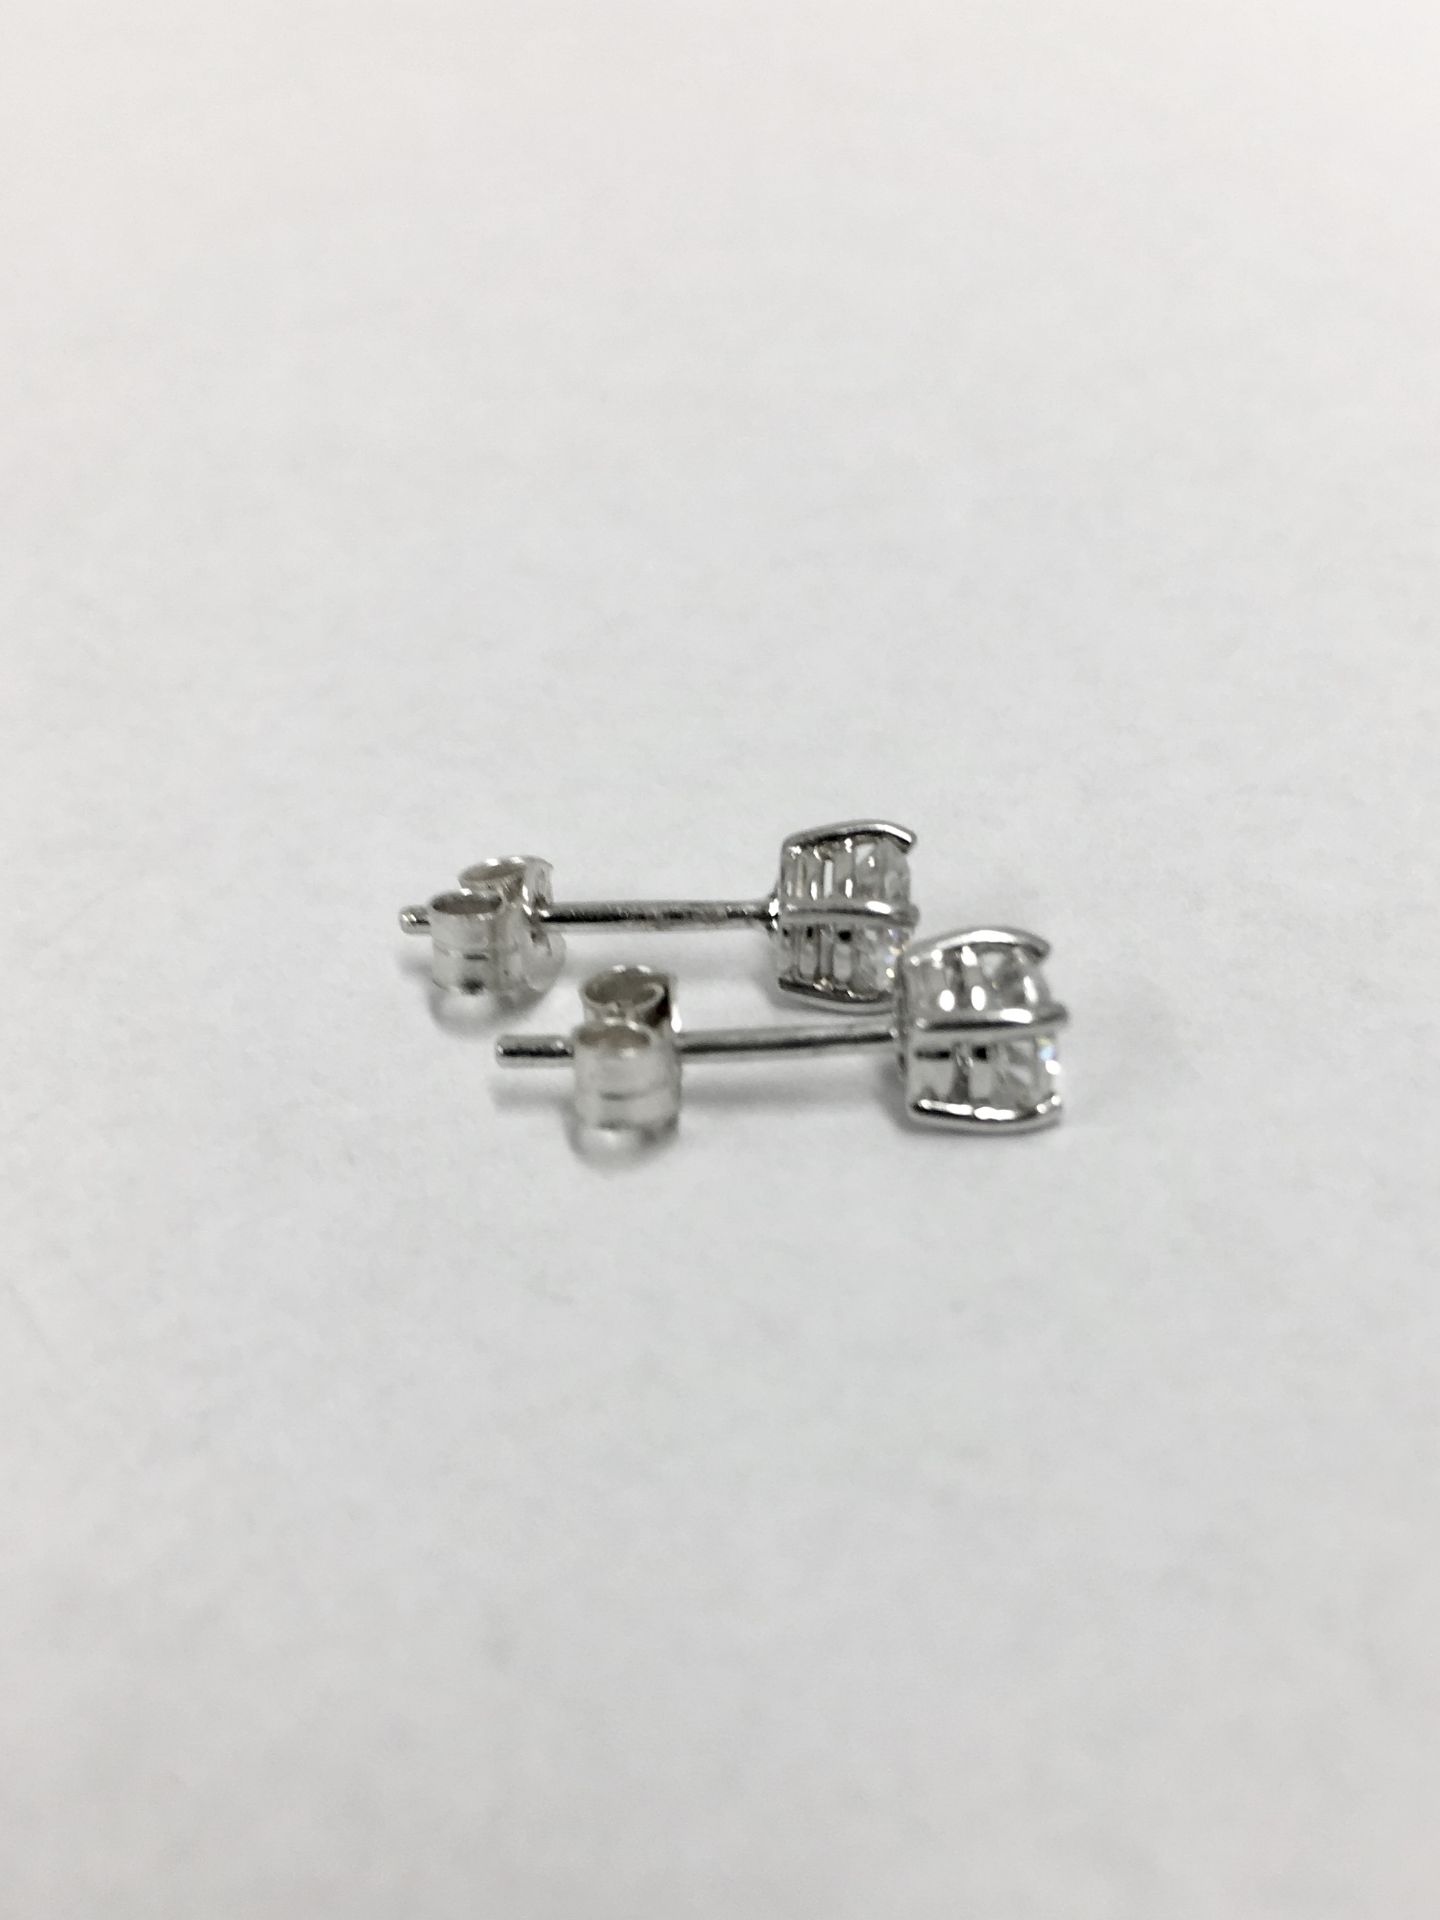 0.80ct Solitaire diamond stud earrings set with brilliant cut diamonds - Image 2 of 2